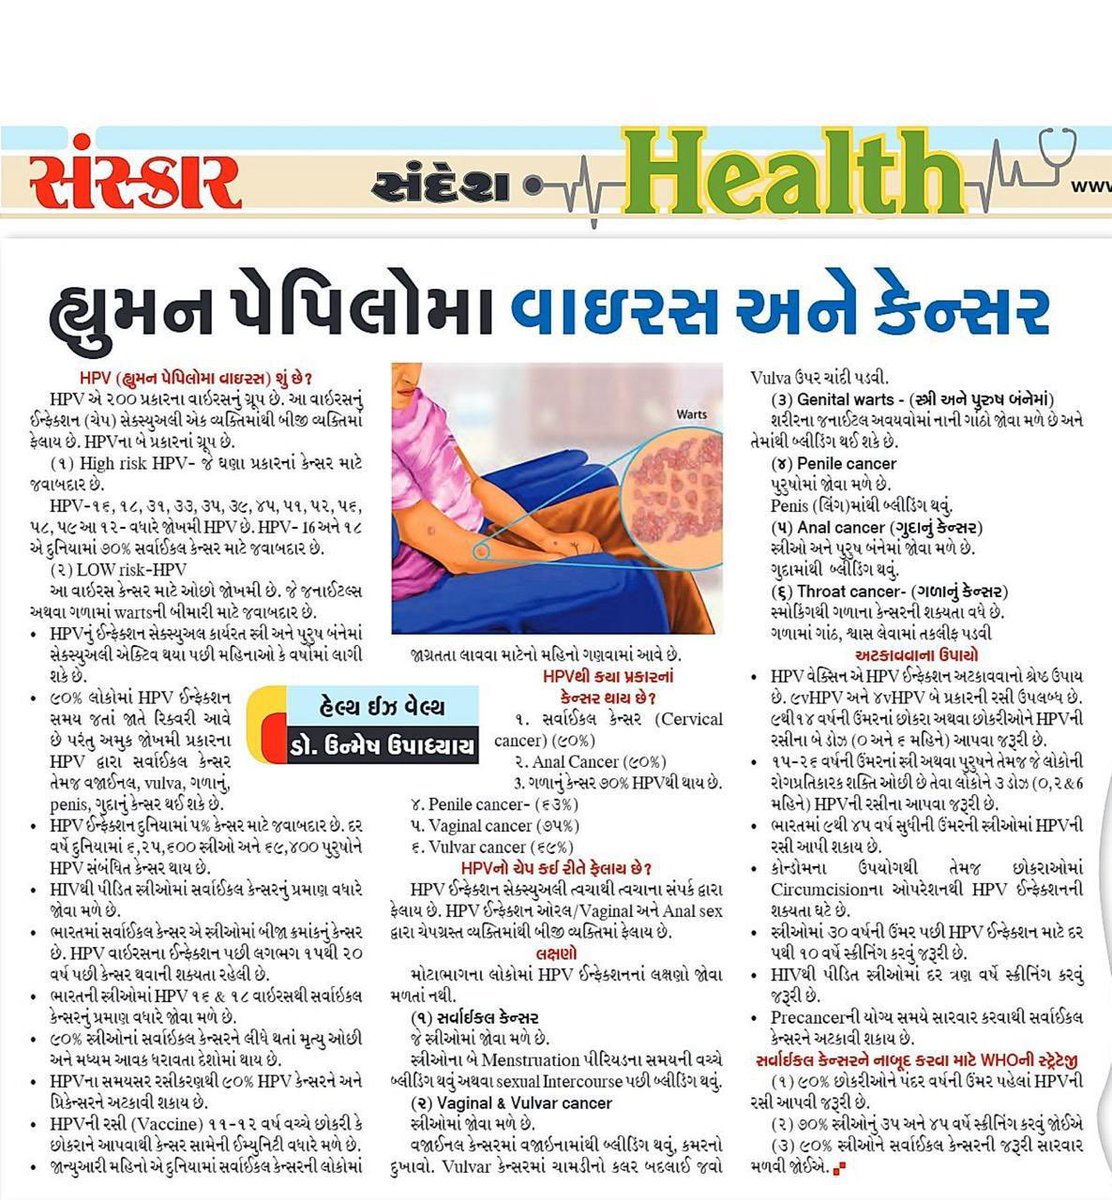 My article about #HPVcancer and Prevention in today’s Sandesh newspaper. #HPVvaccine #vaccinesaveslive